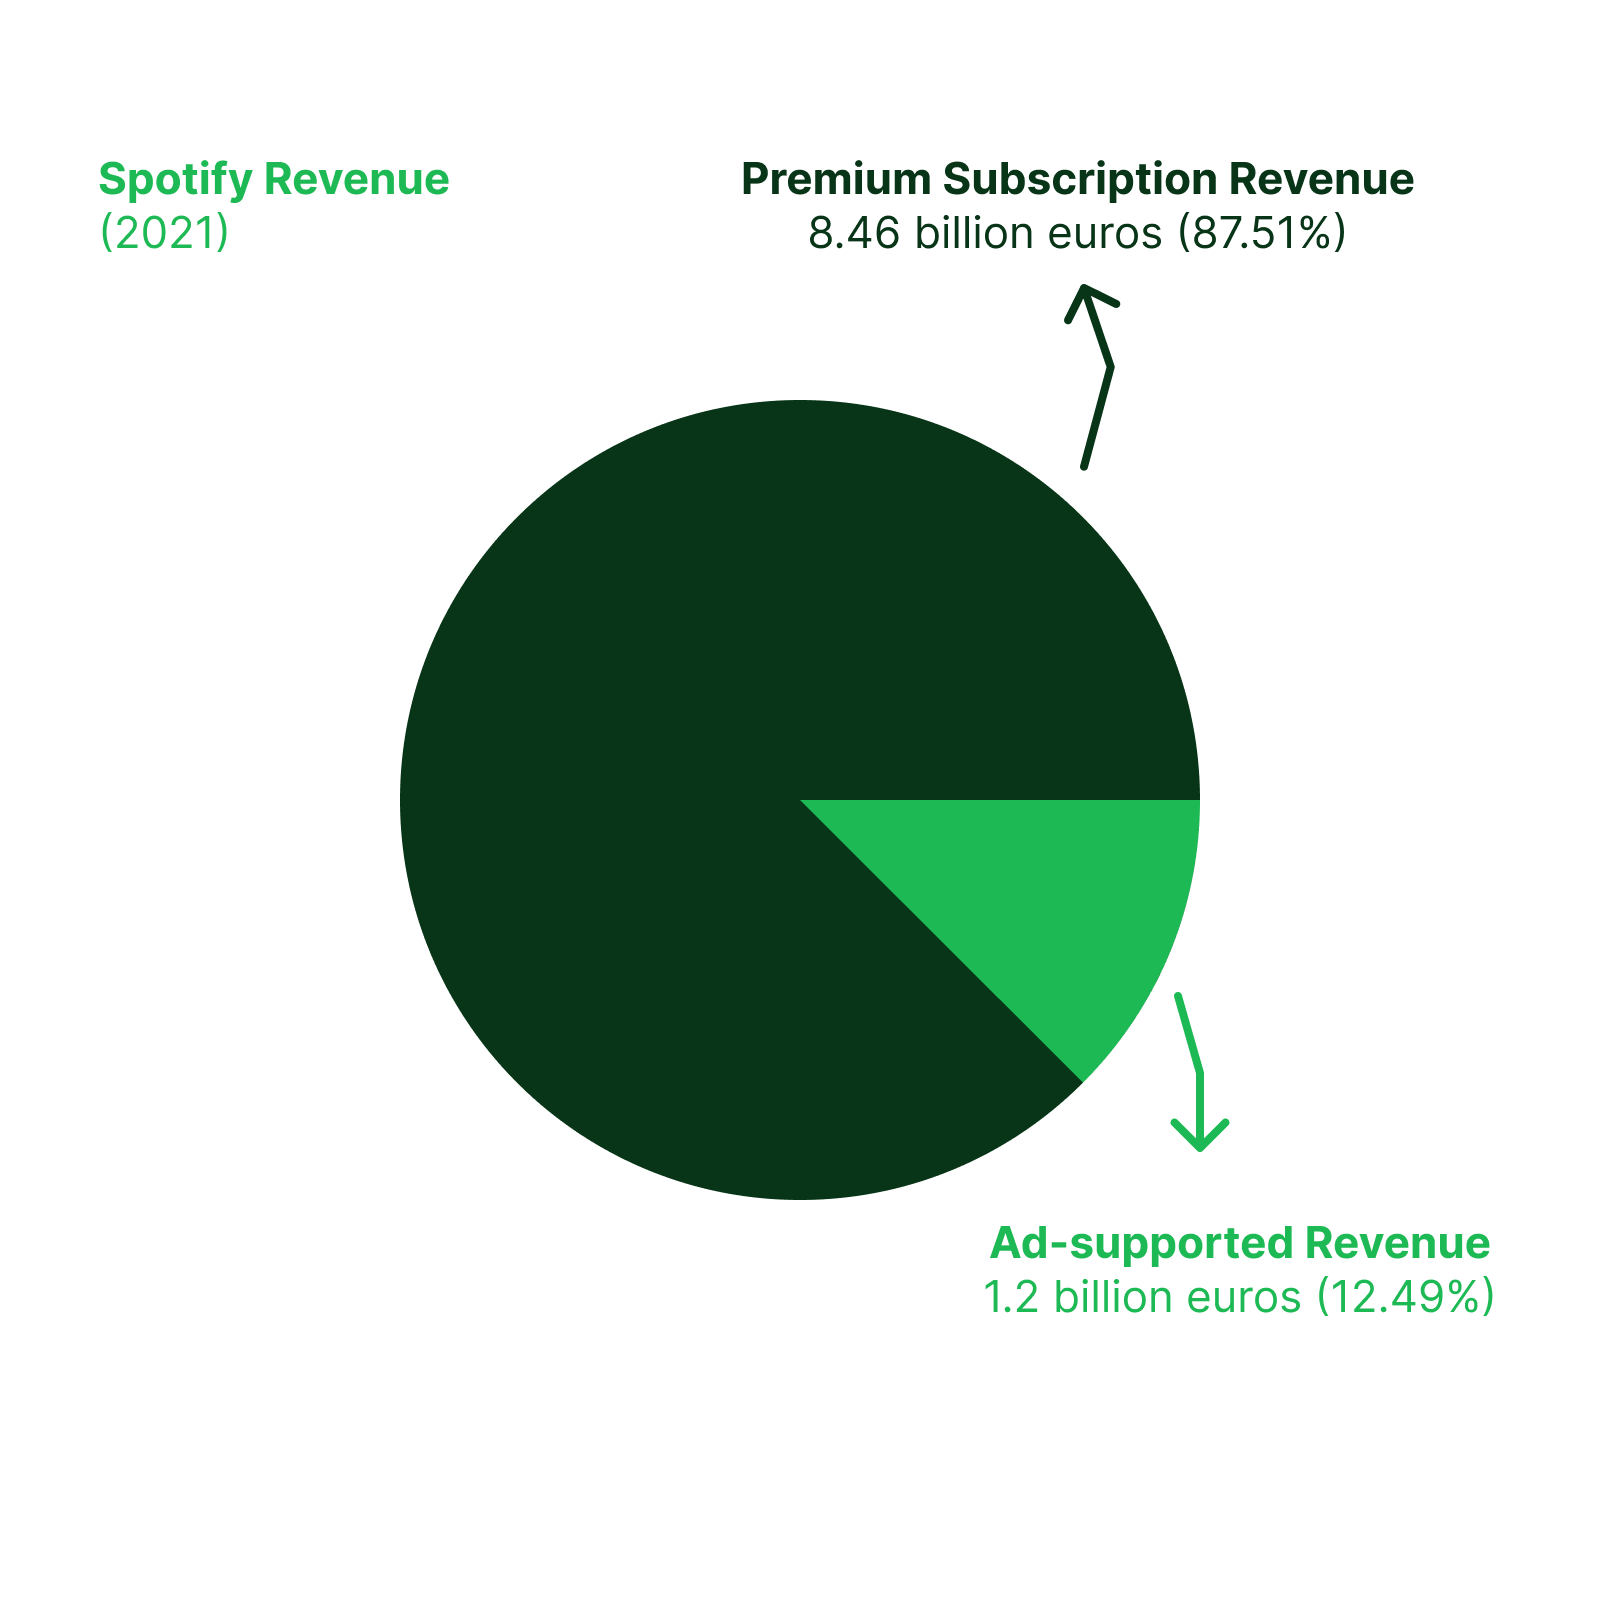 Pie chart of distribution of revenue for Spotify in 2021 between ad-supported and premium subscriptions